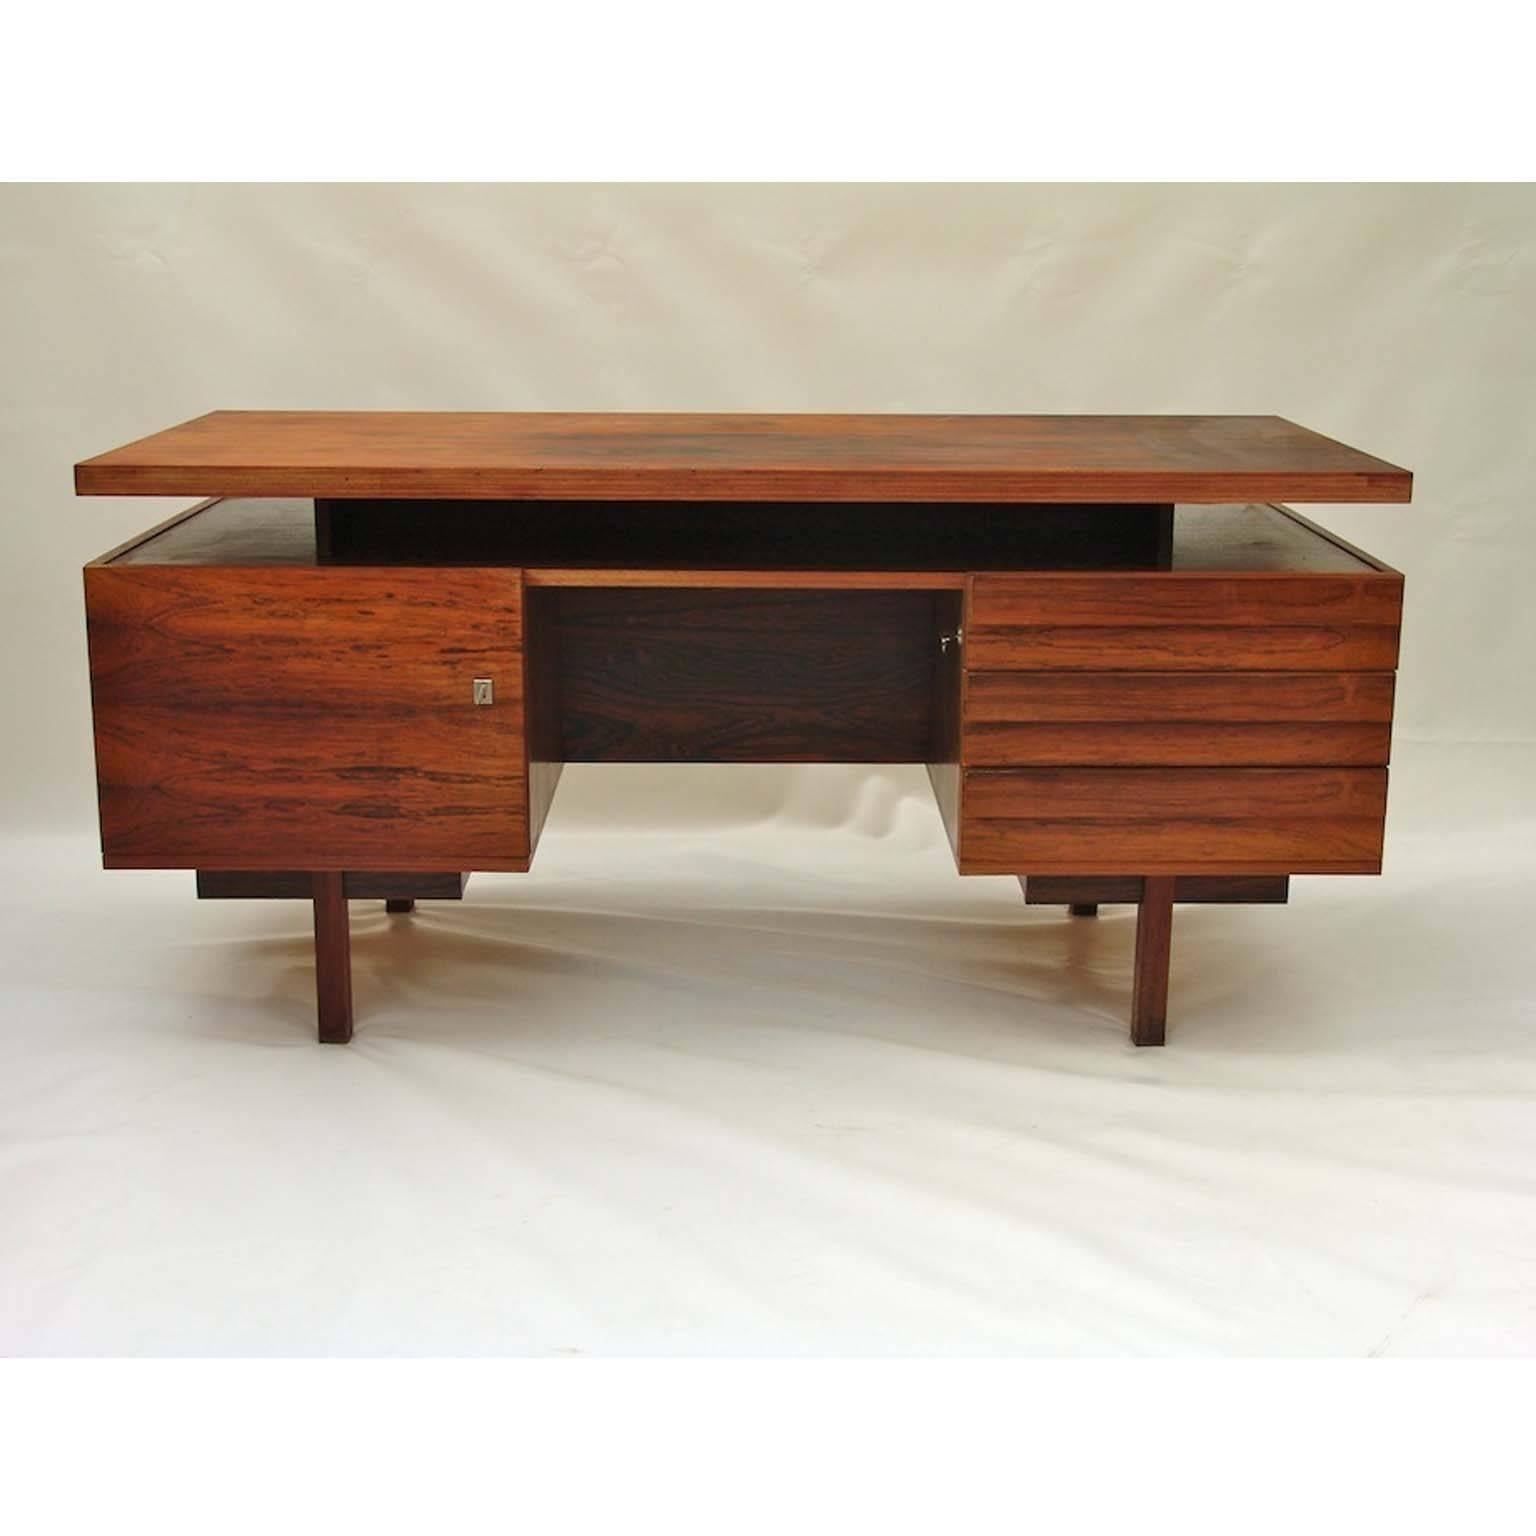 Danish rosewood desk. Very heavy. Unfortunately we do not know the designer or manufacturer.